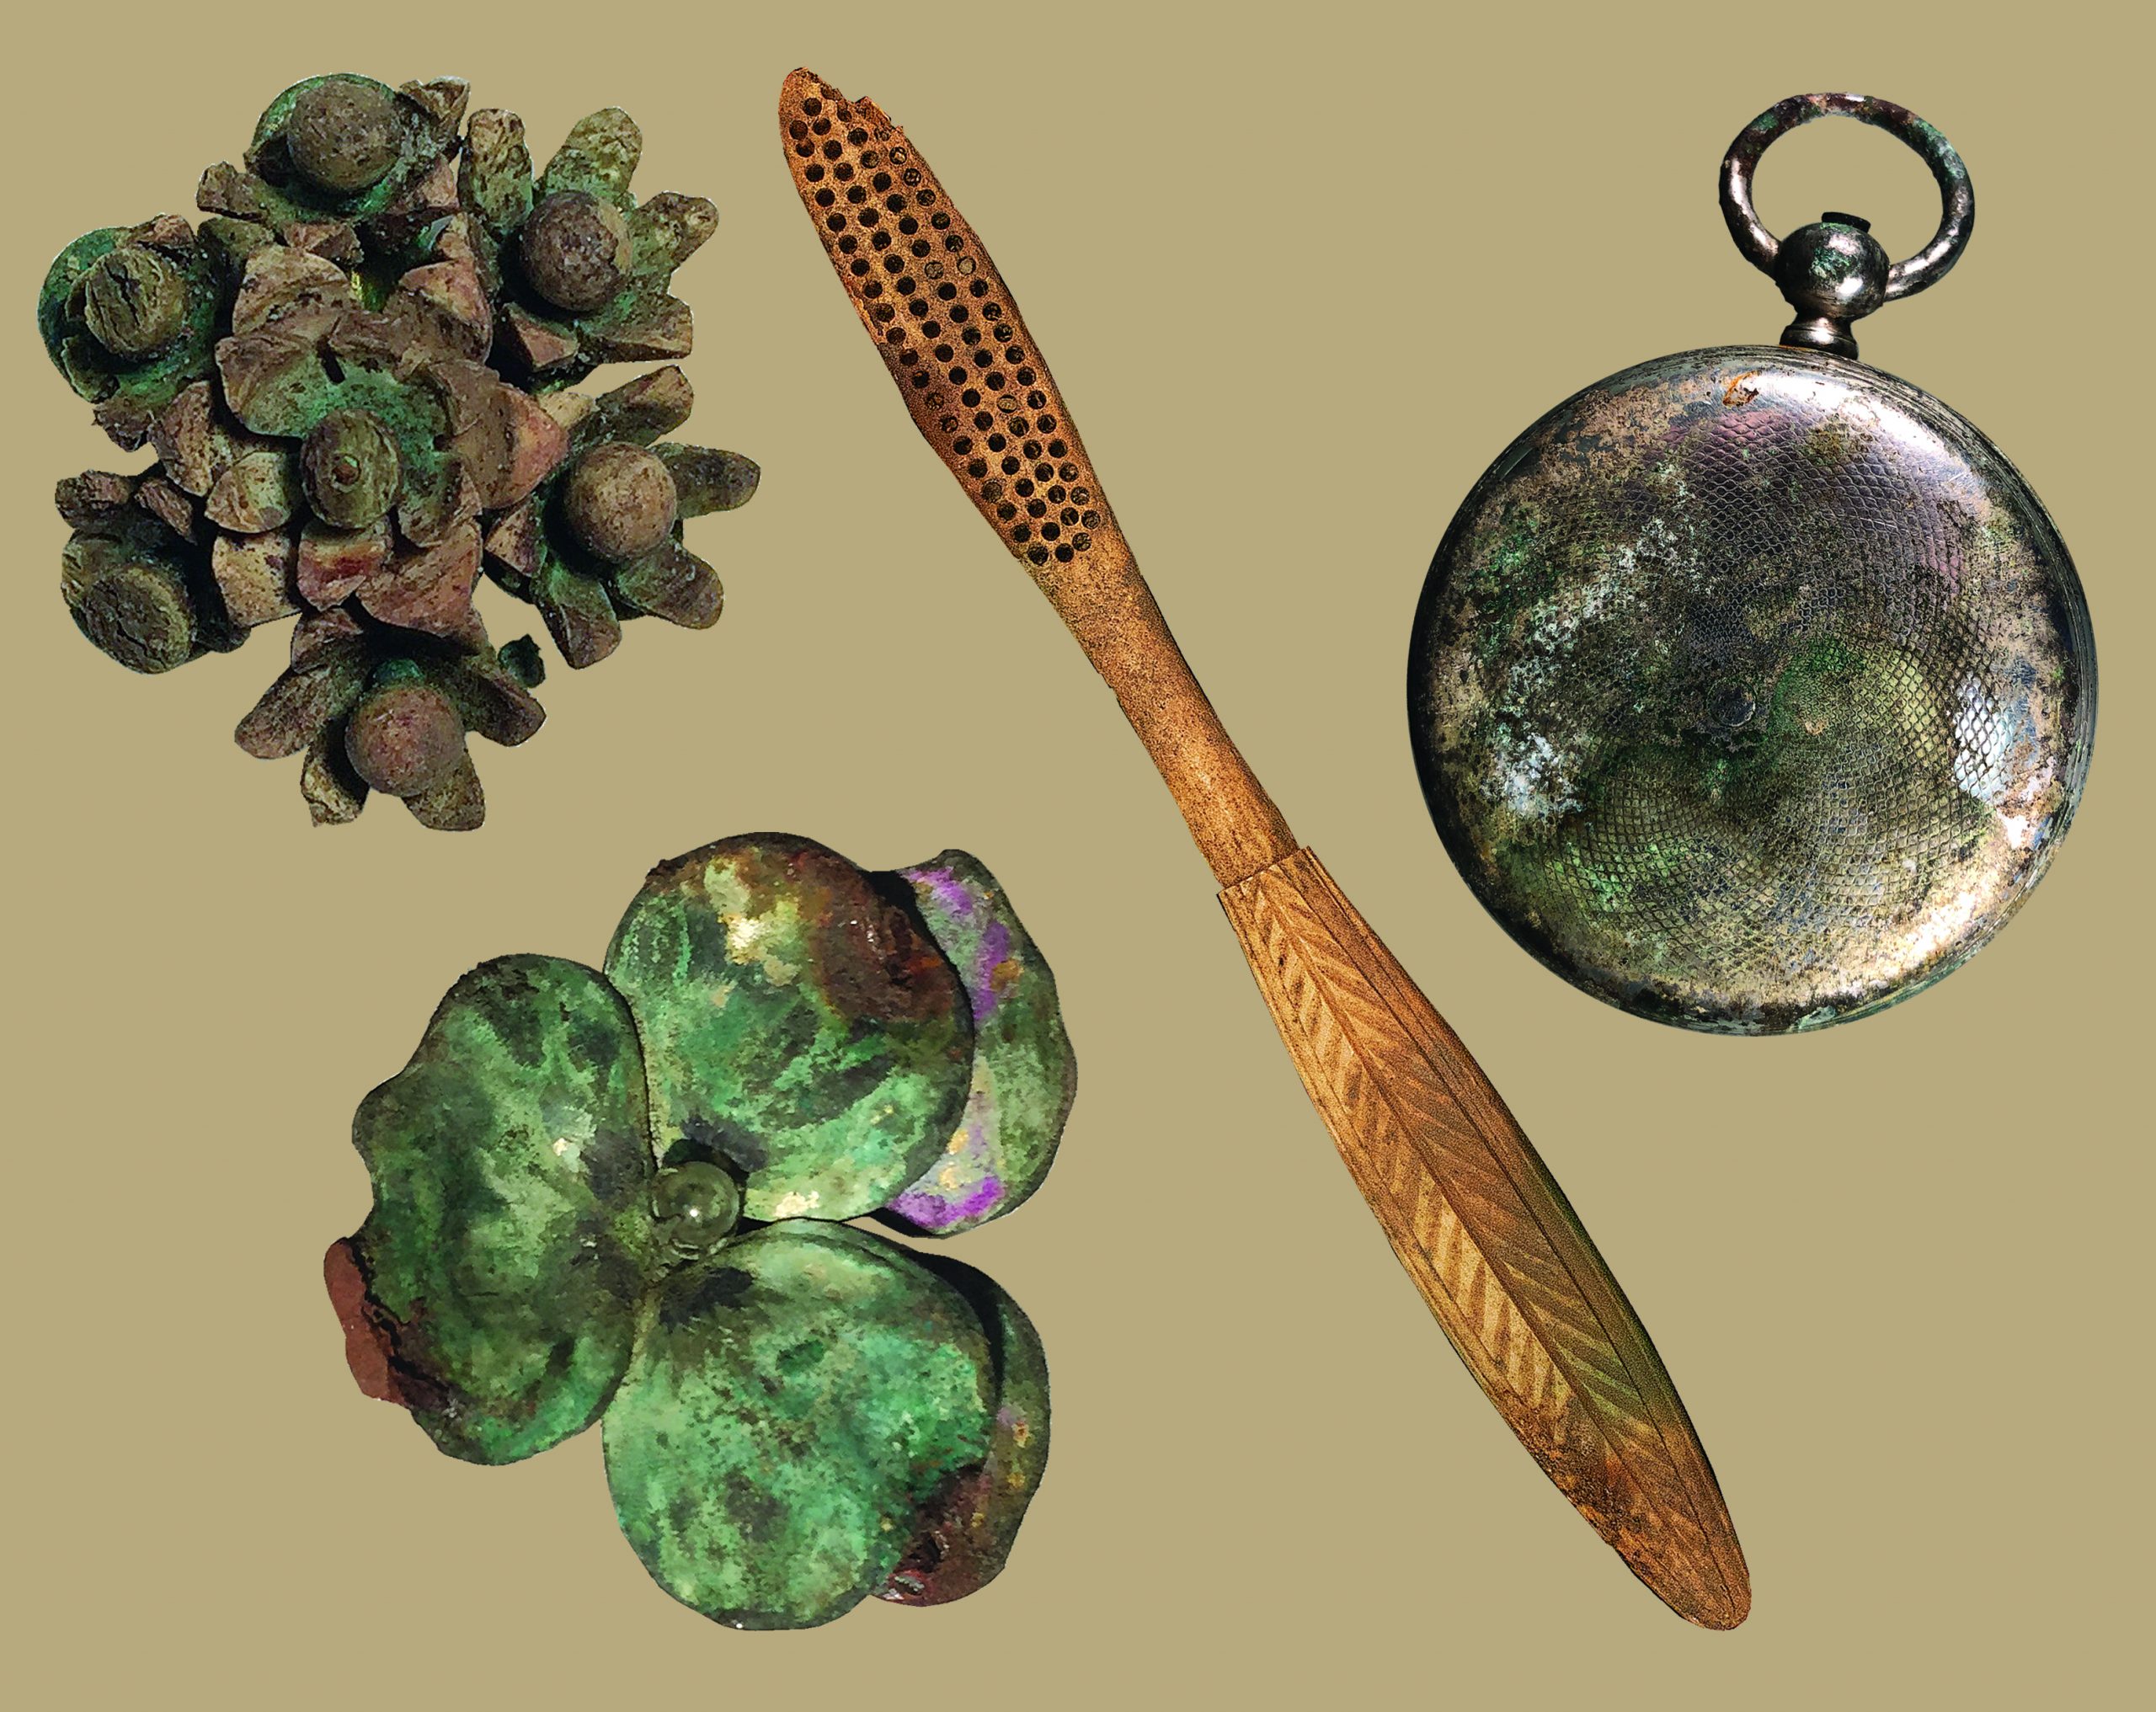 photo showing two carved floral brooches that are tarnished, a wooden toothbrush, and a silver pocketwatch